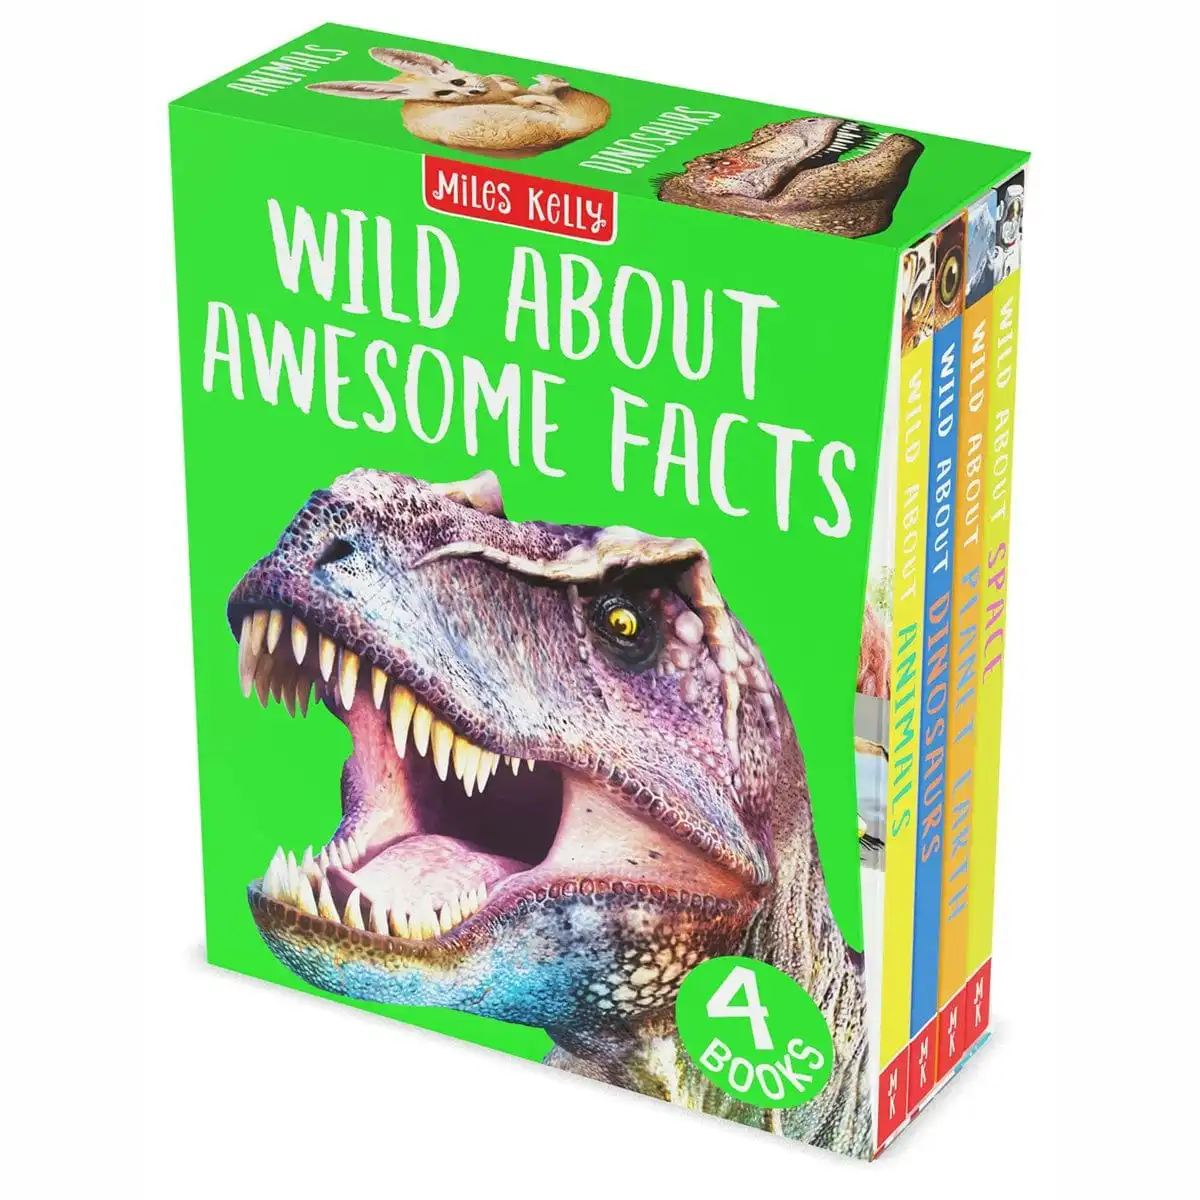 Wild About Awesome Facts - 4 Copy Box Set